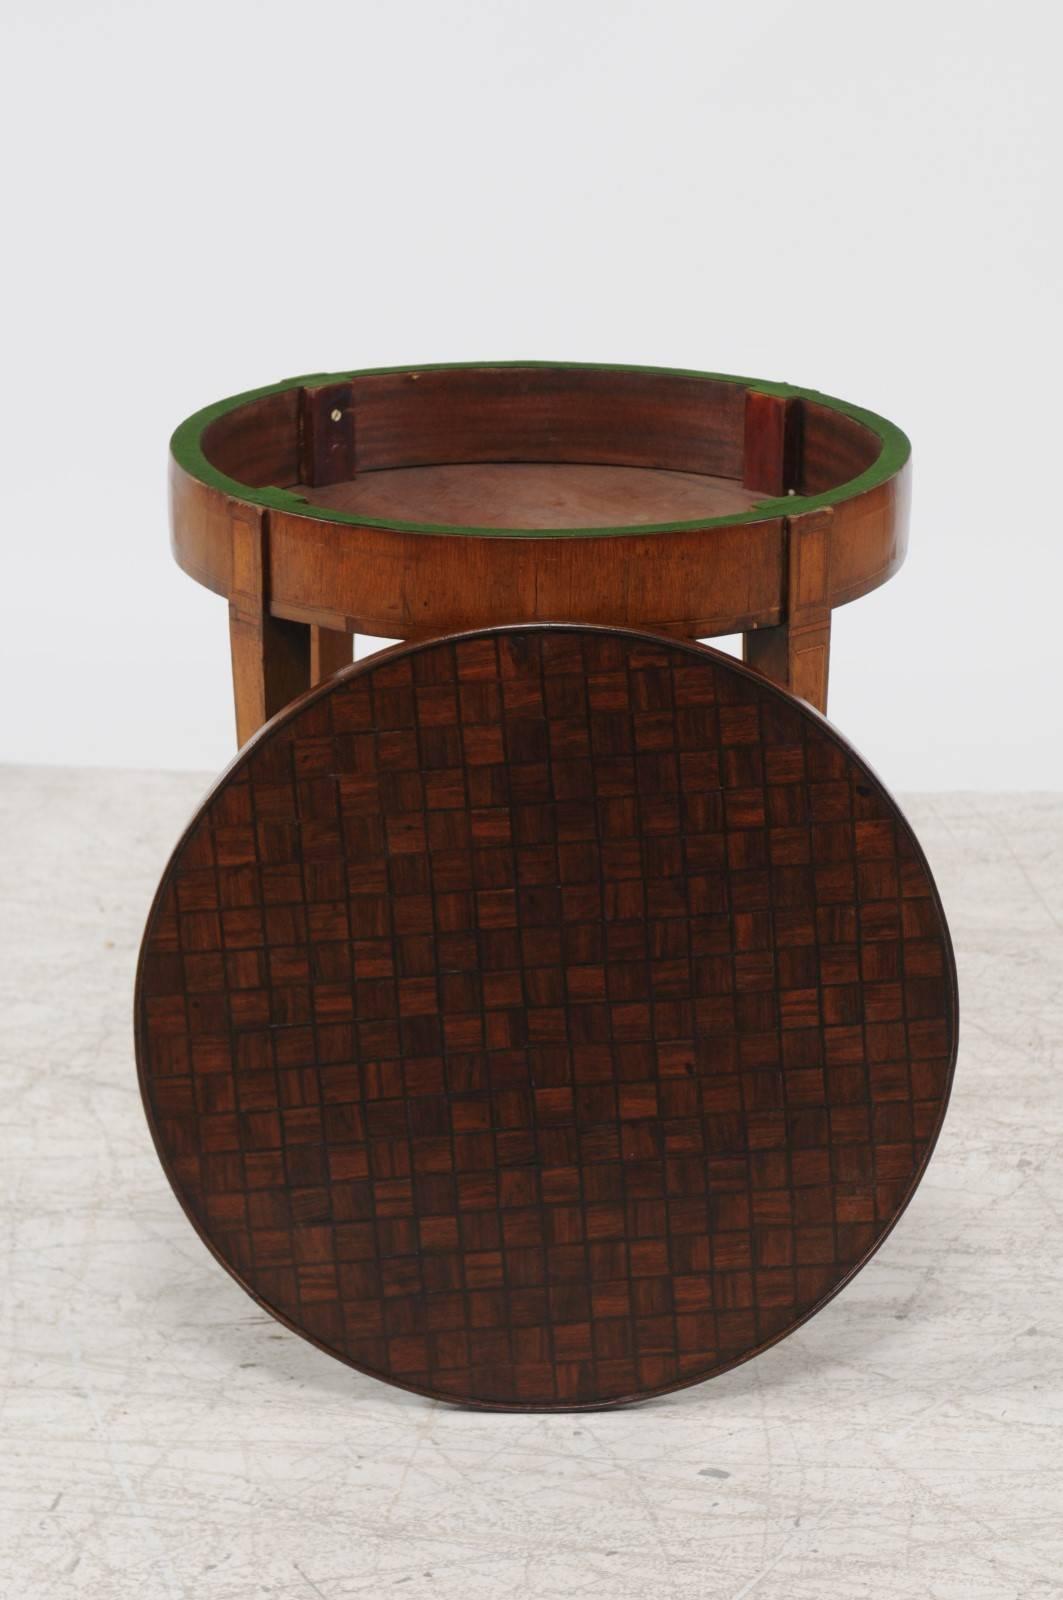 A French Louis XVI style round parquetry top game table with flip top and tapered legs from the second half of the 19th century. This French table features a circular parquetry top that flips to reveal a green felt lined side perfect for a game